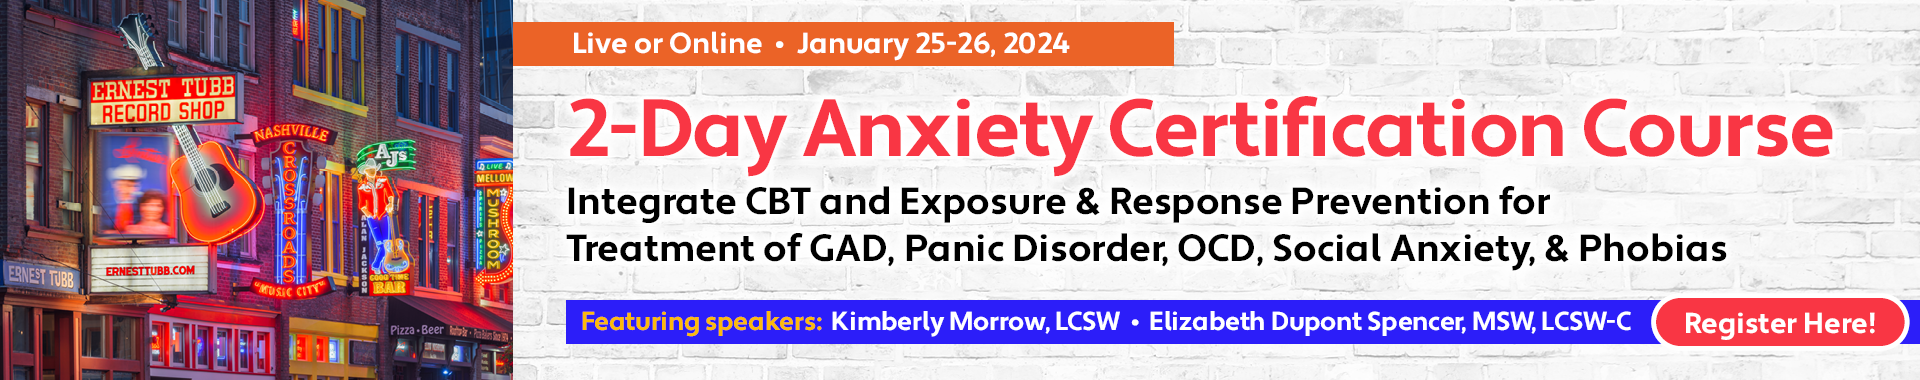 2-Day Anxiety Certification Course